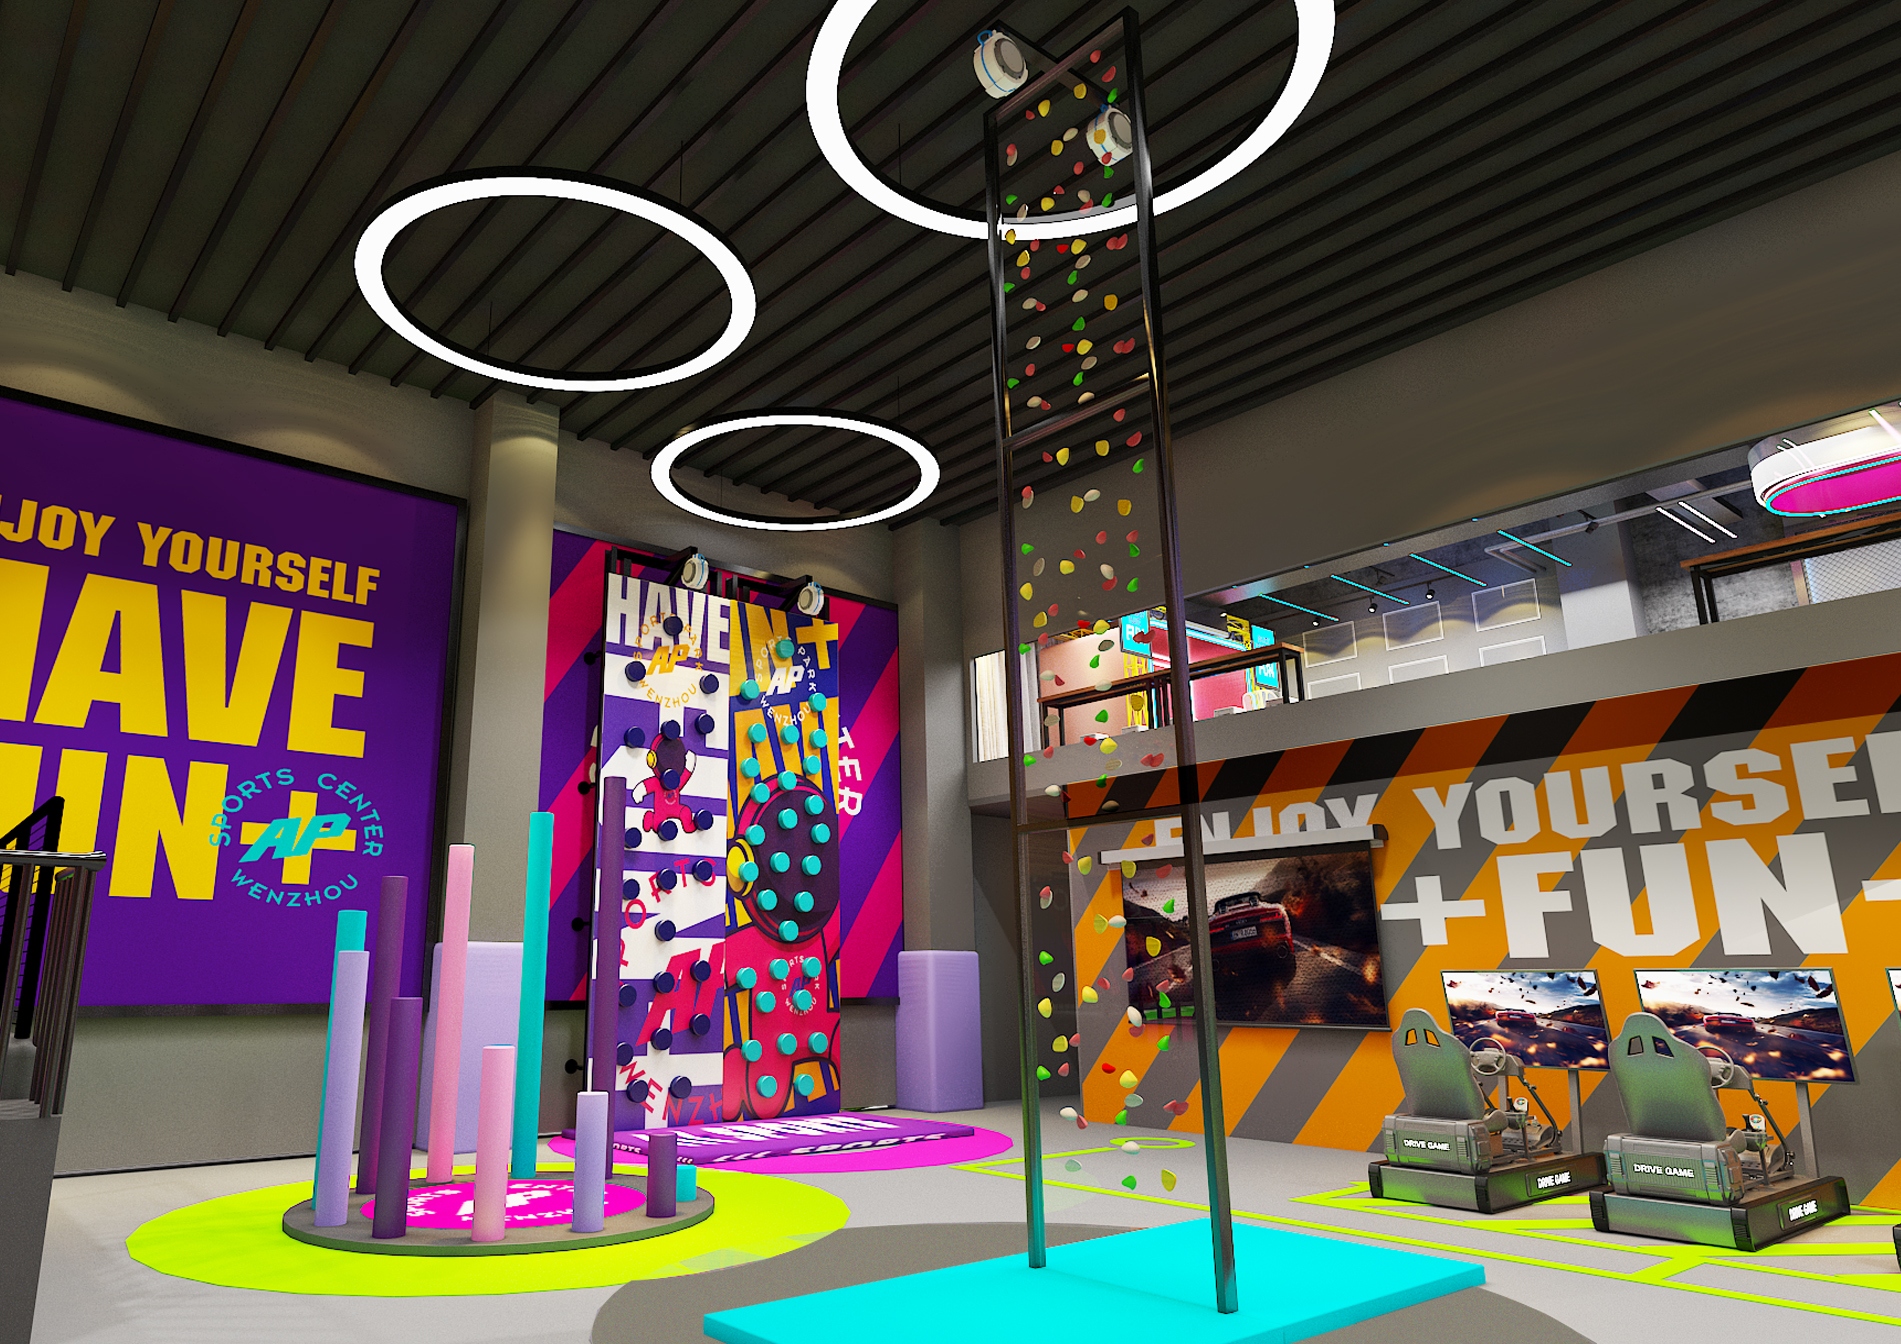 Trampoline park with climbing wall and Arc game cost